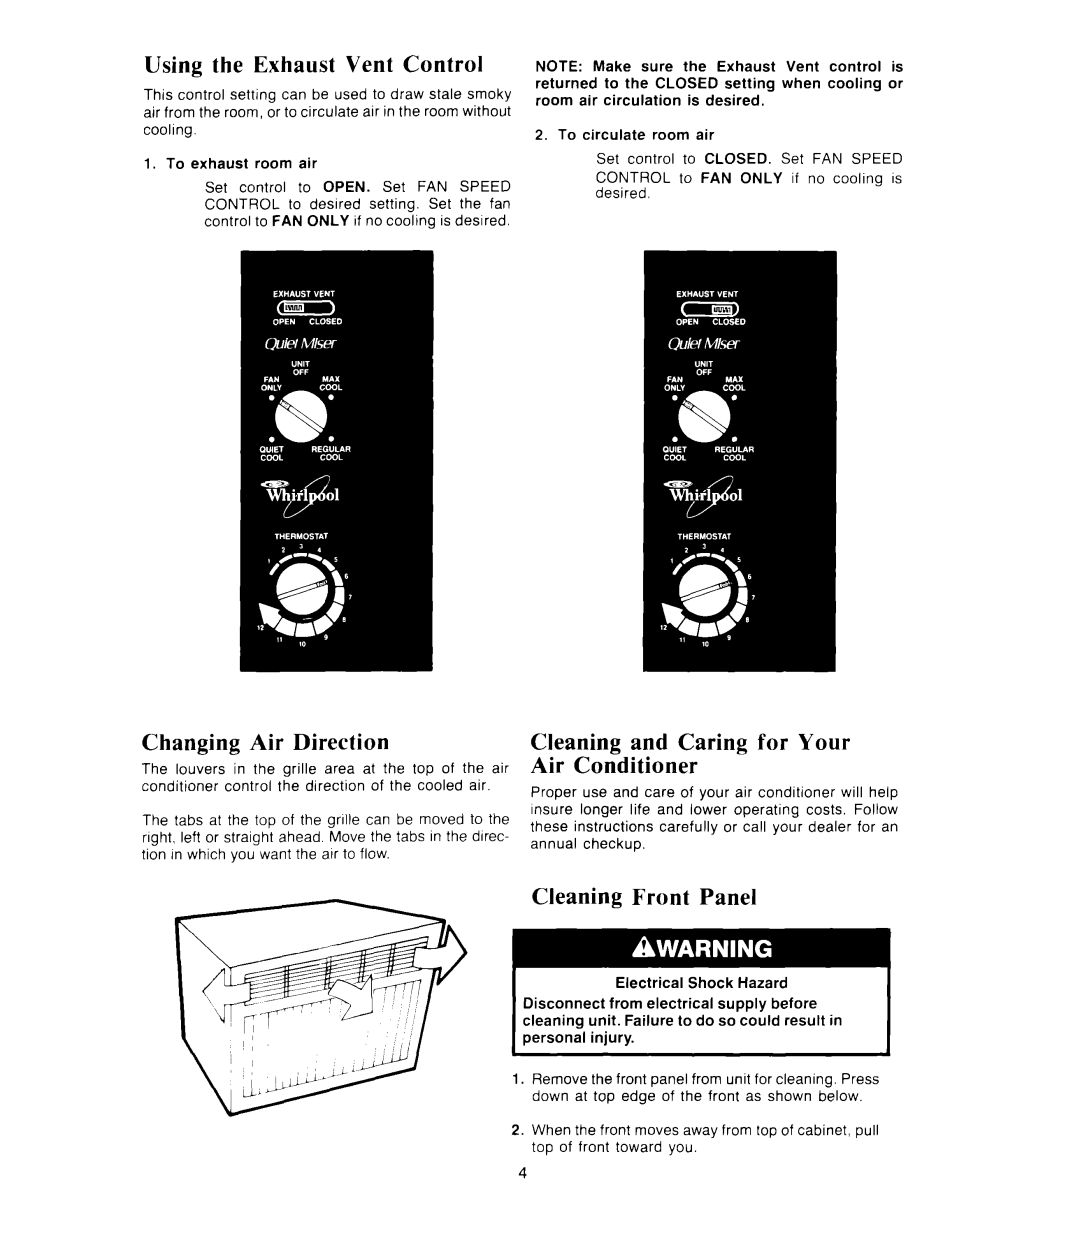 Whirlpool ACP602XT Using the Exhaust Vent Control, Changing Air Direction, Cleaning and Caring for Your Air Conditioner 